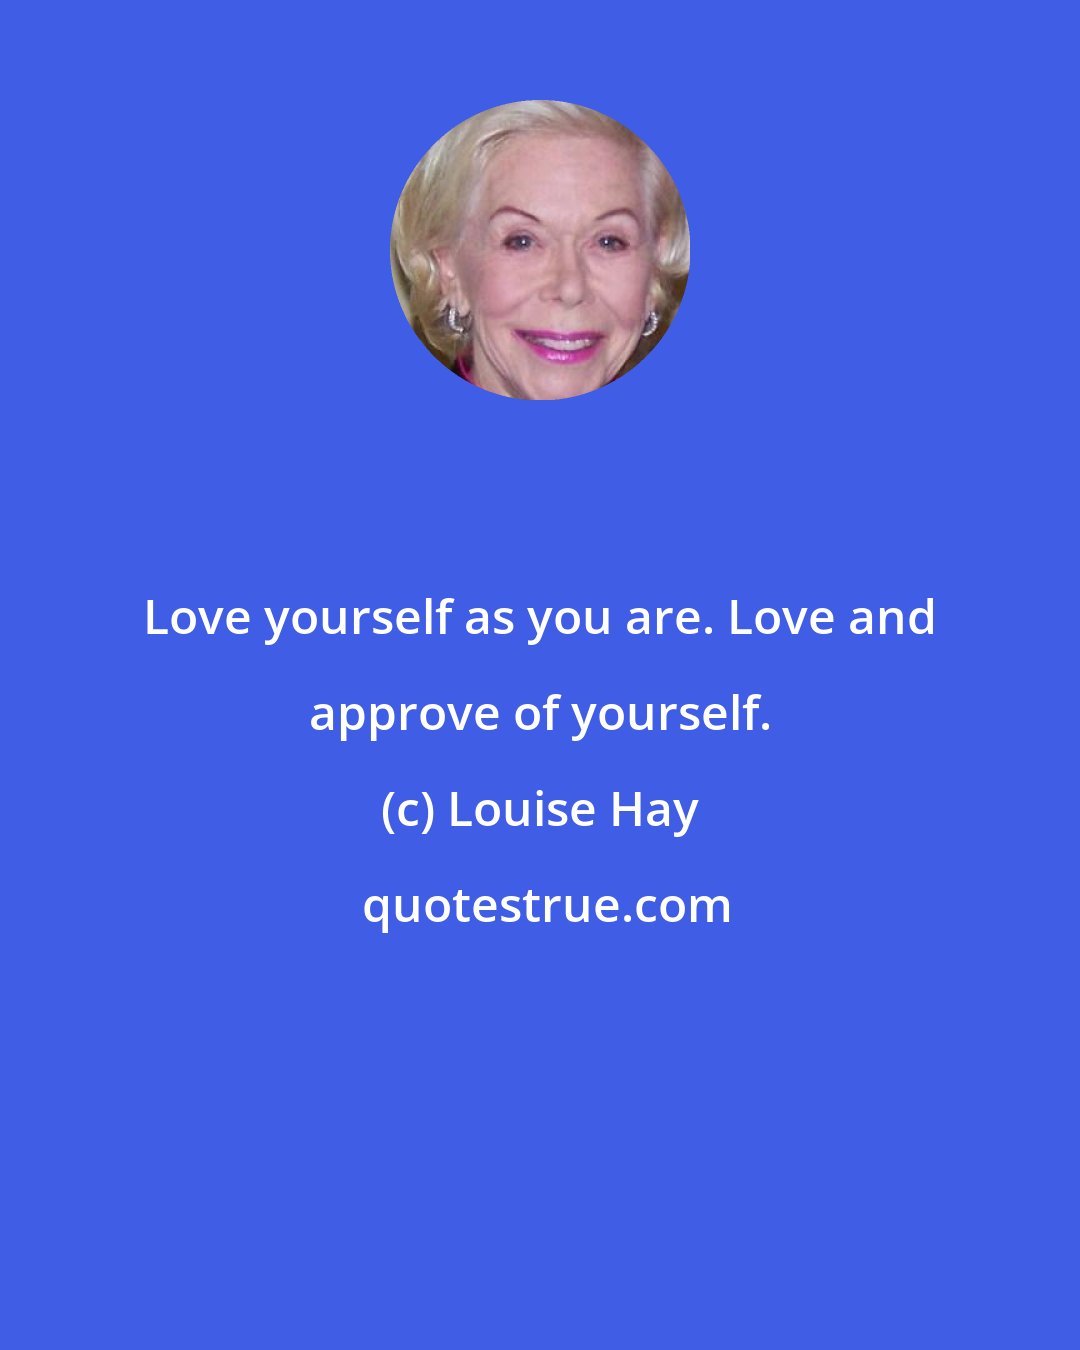 Louise Hay: Love yourself as you are. Love and approve of yourself.